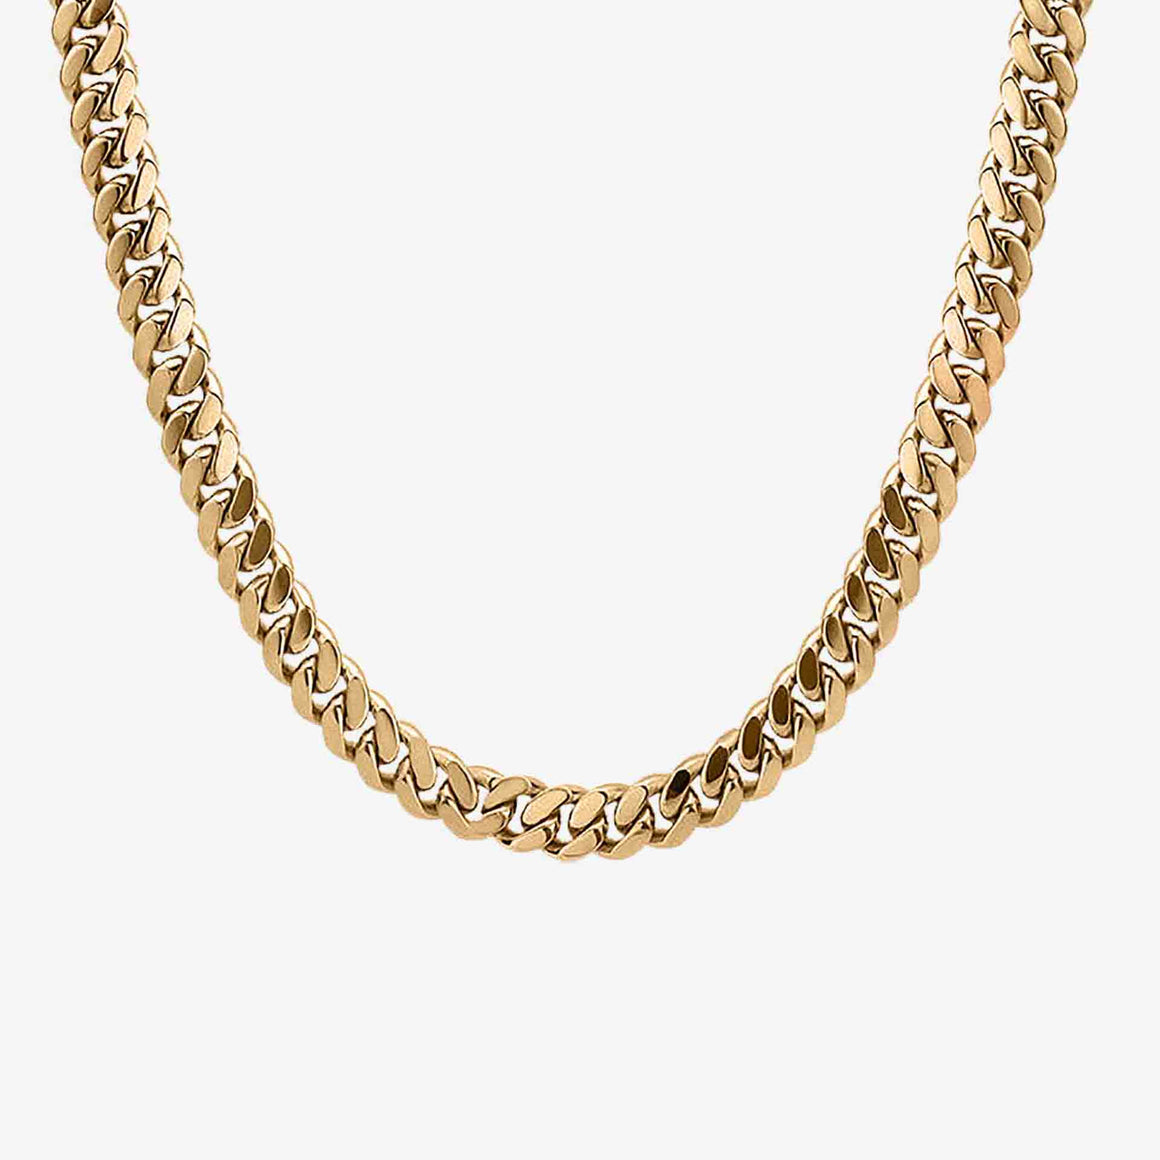 54 FLORAL 12mm CURB NECKLACE CHAIN - GOLD